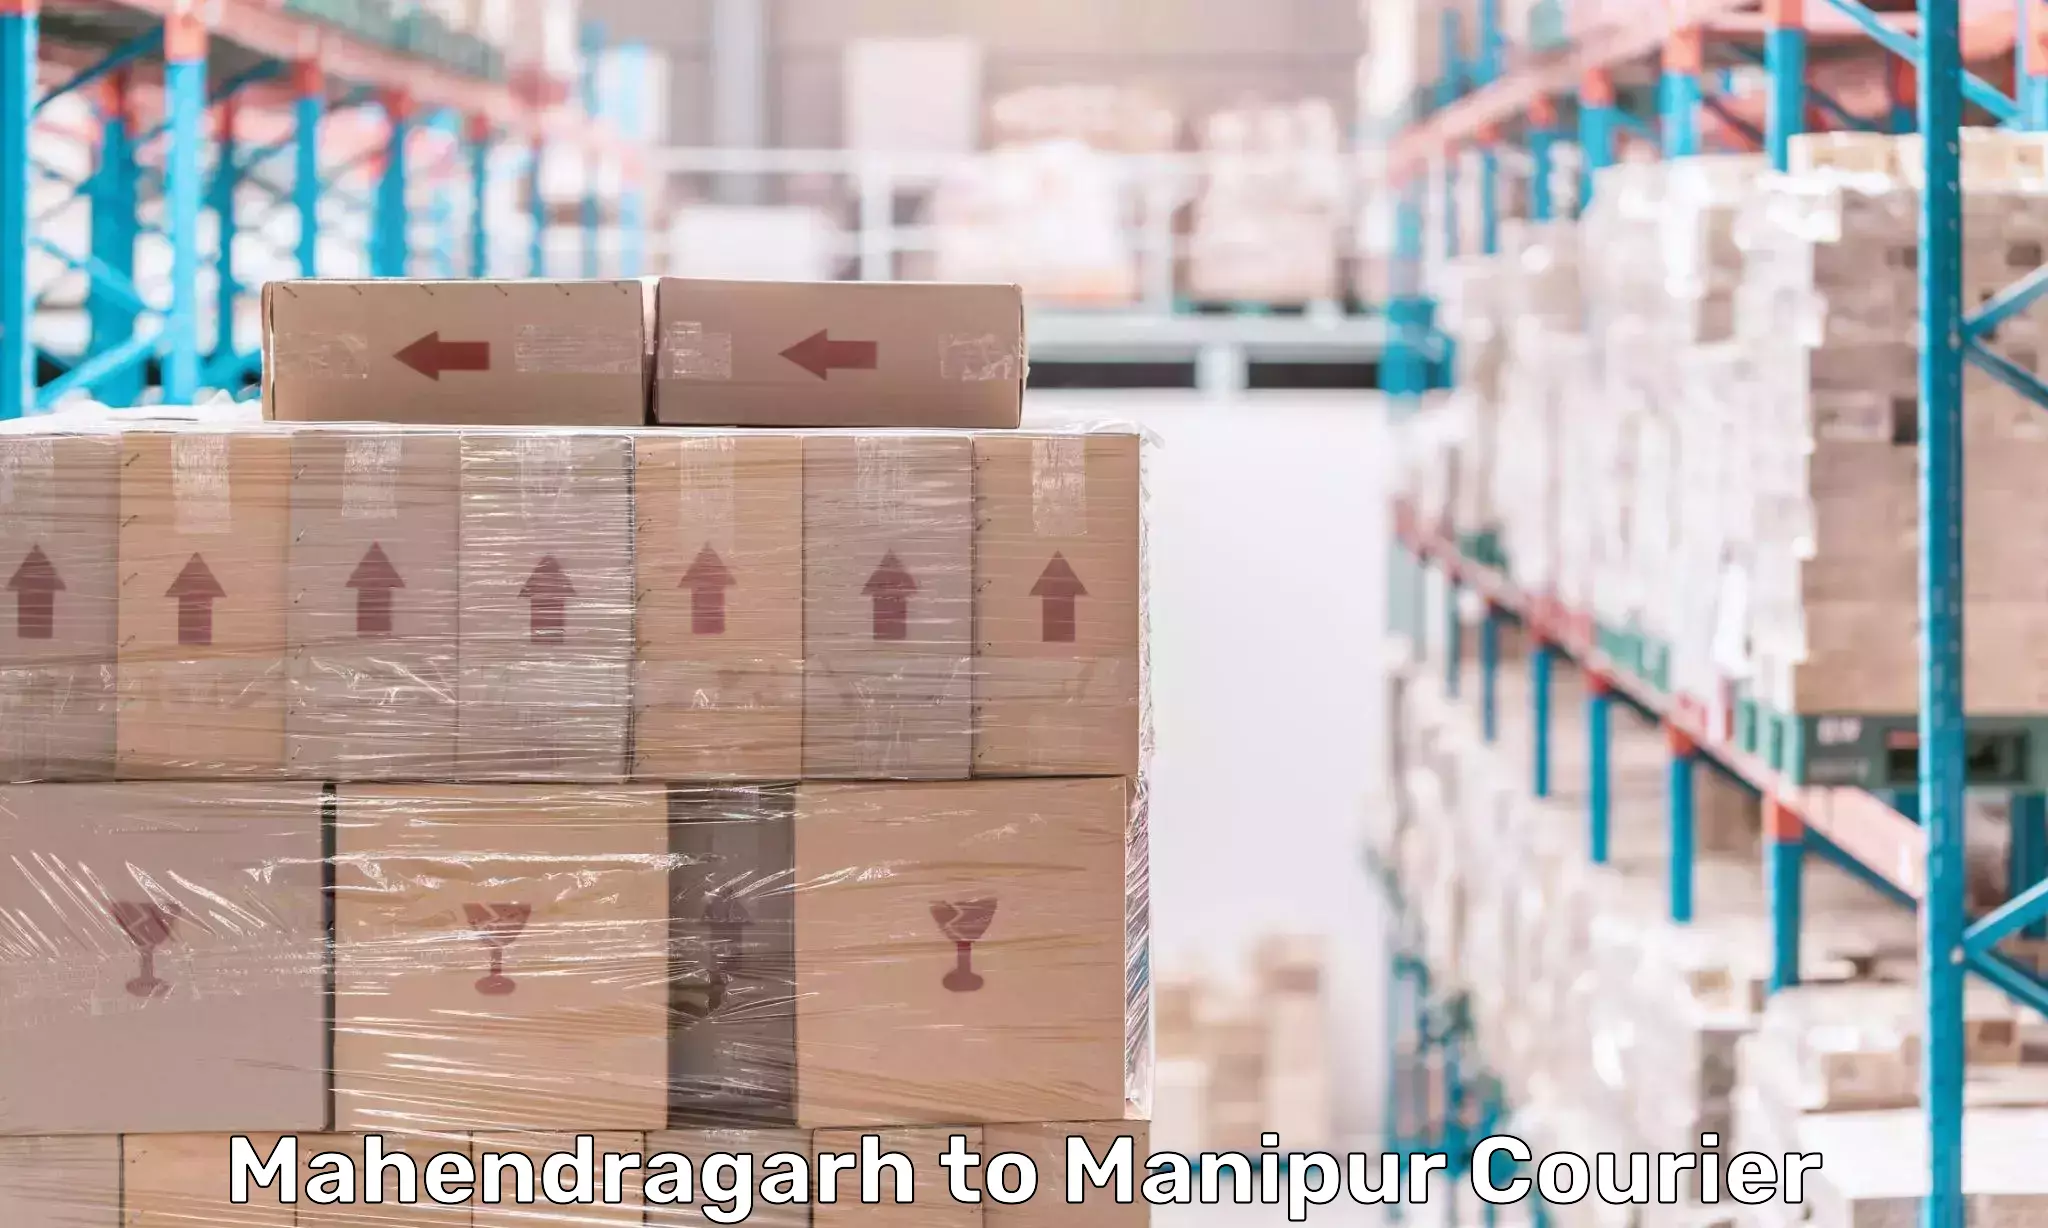 State-of-the-art courier technology Mahendragarh to Tadubi